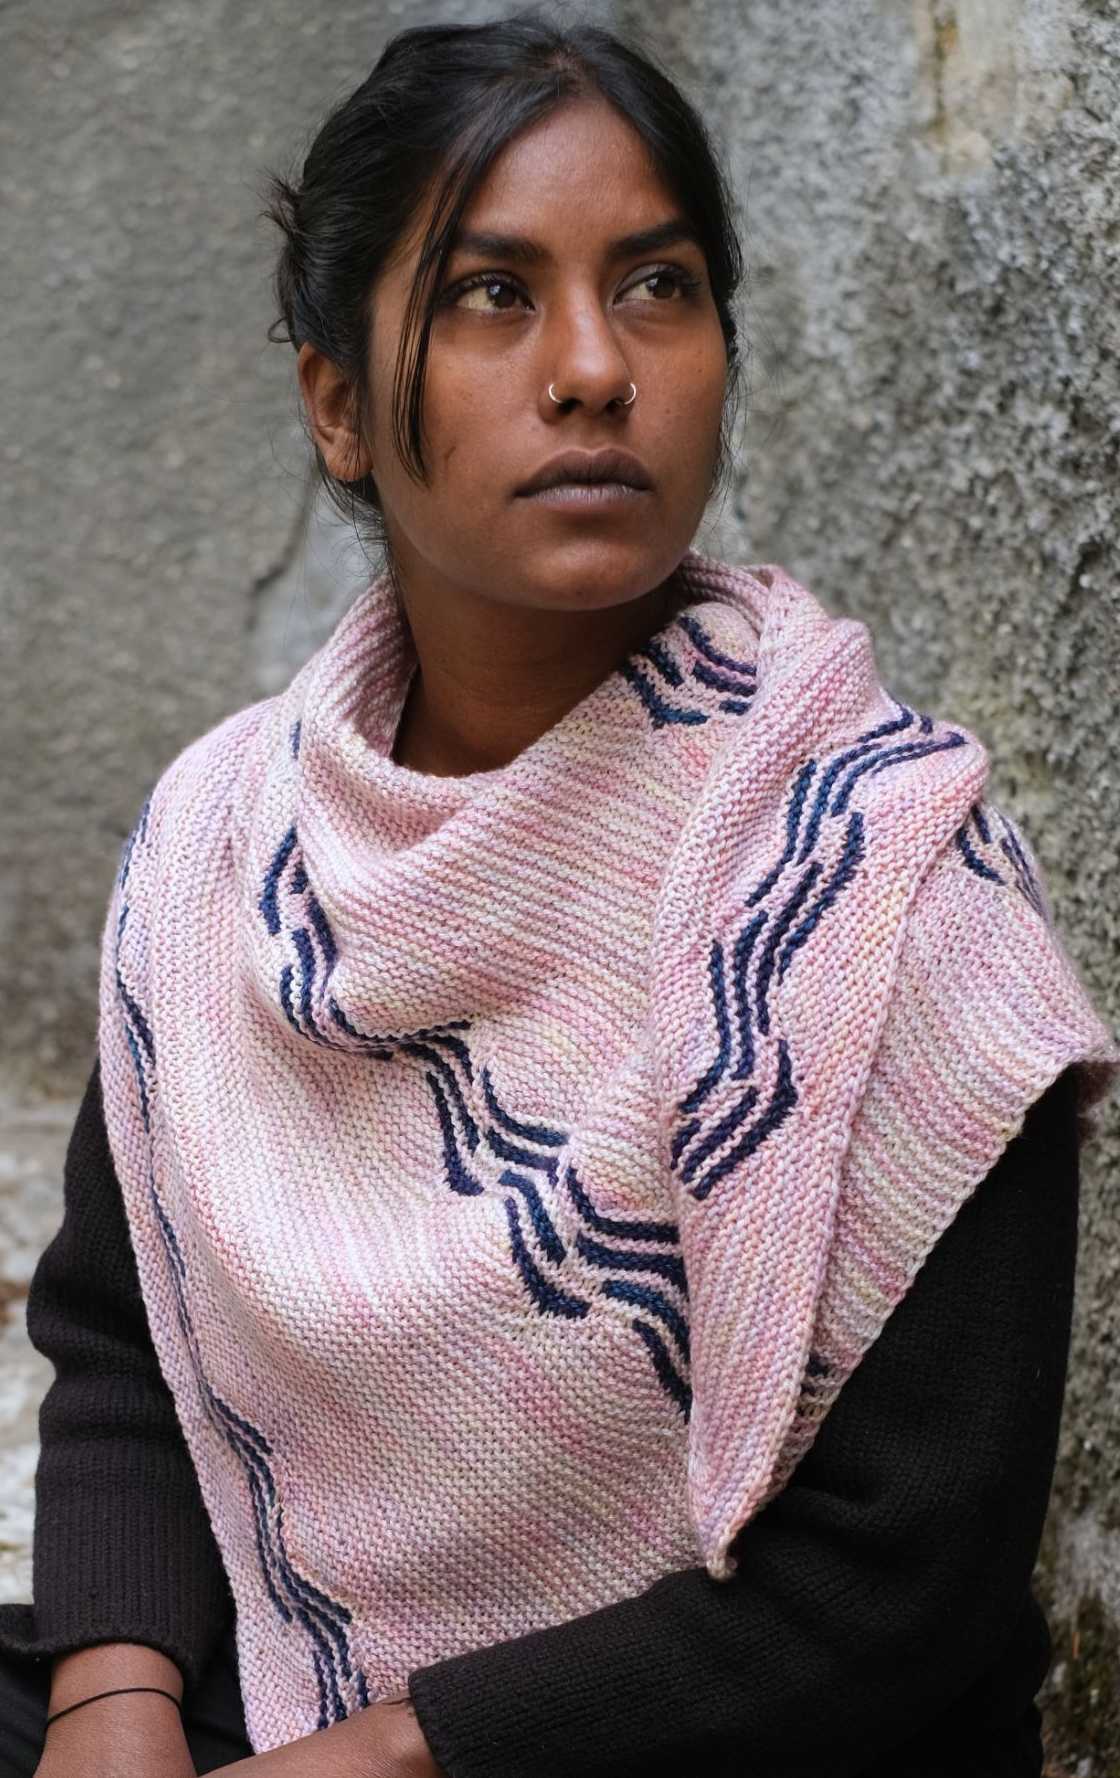 brown skinned person with hair pulled back from their face, they havce some strands in front and a a nose ring on either side of their nose. they are looking forward, up and to the left of the camera. They wear a pink knitted shawl draped around their shoulderd which features dark blue sectional waves. 